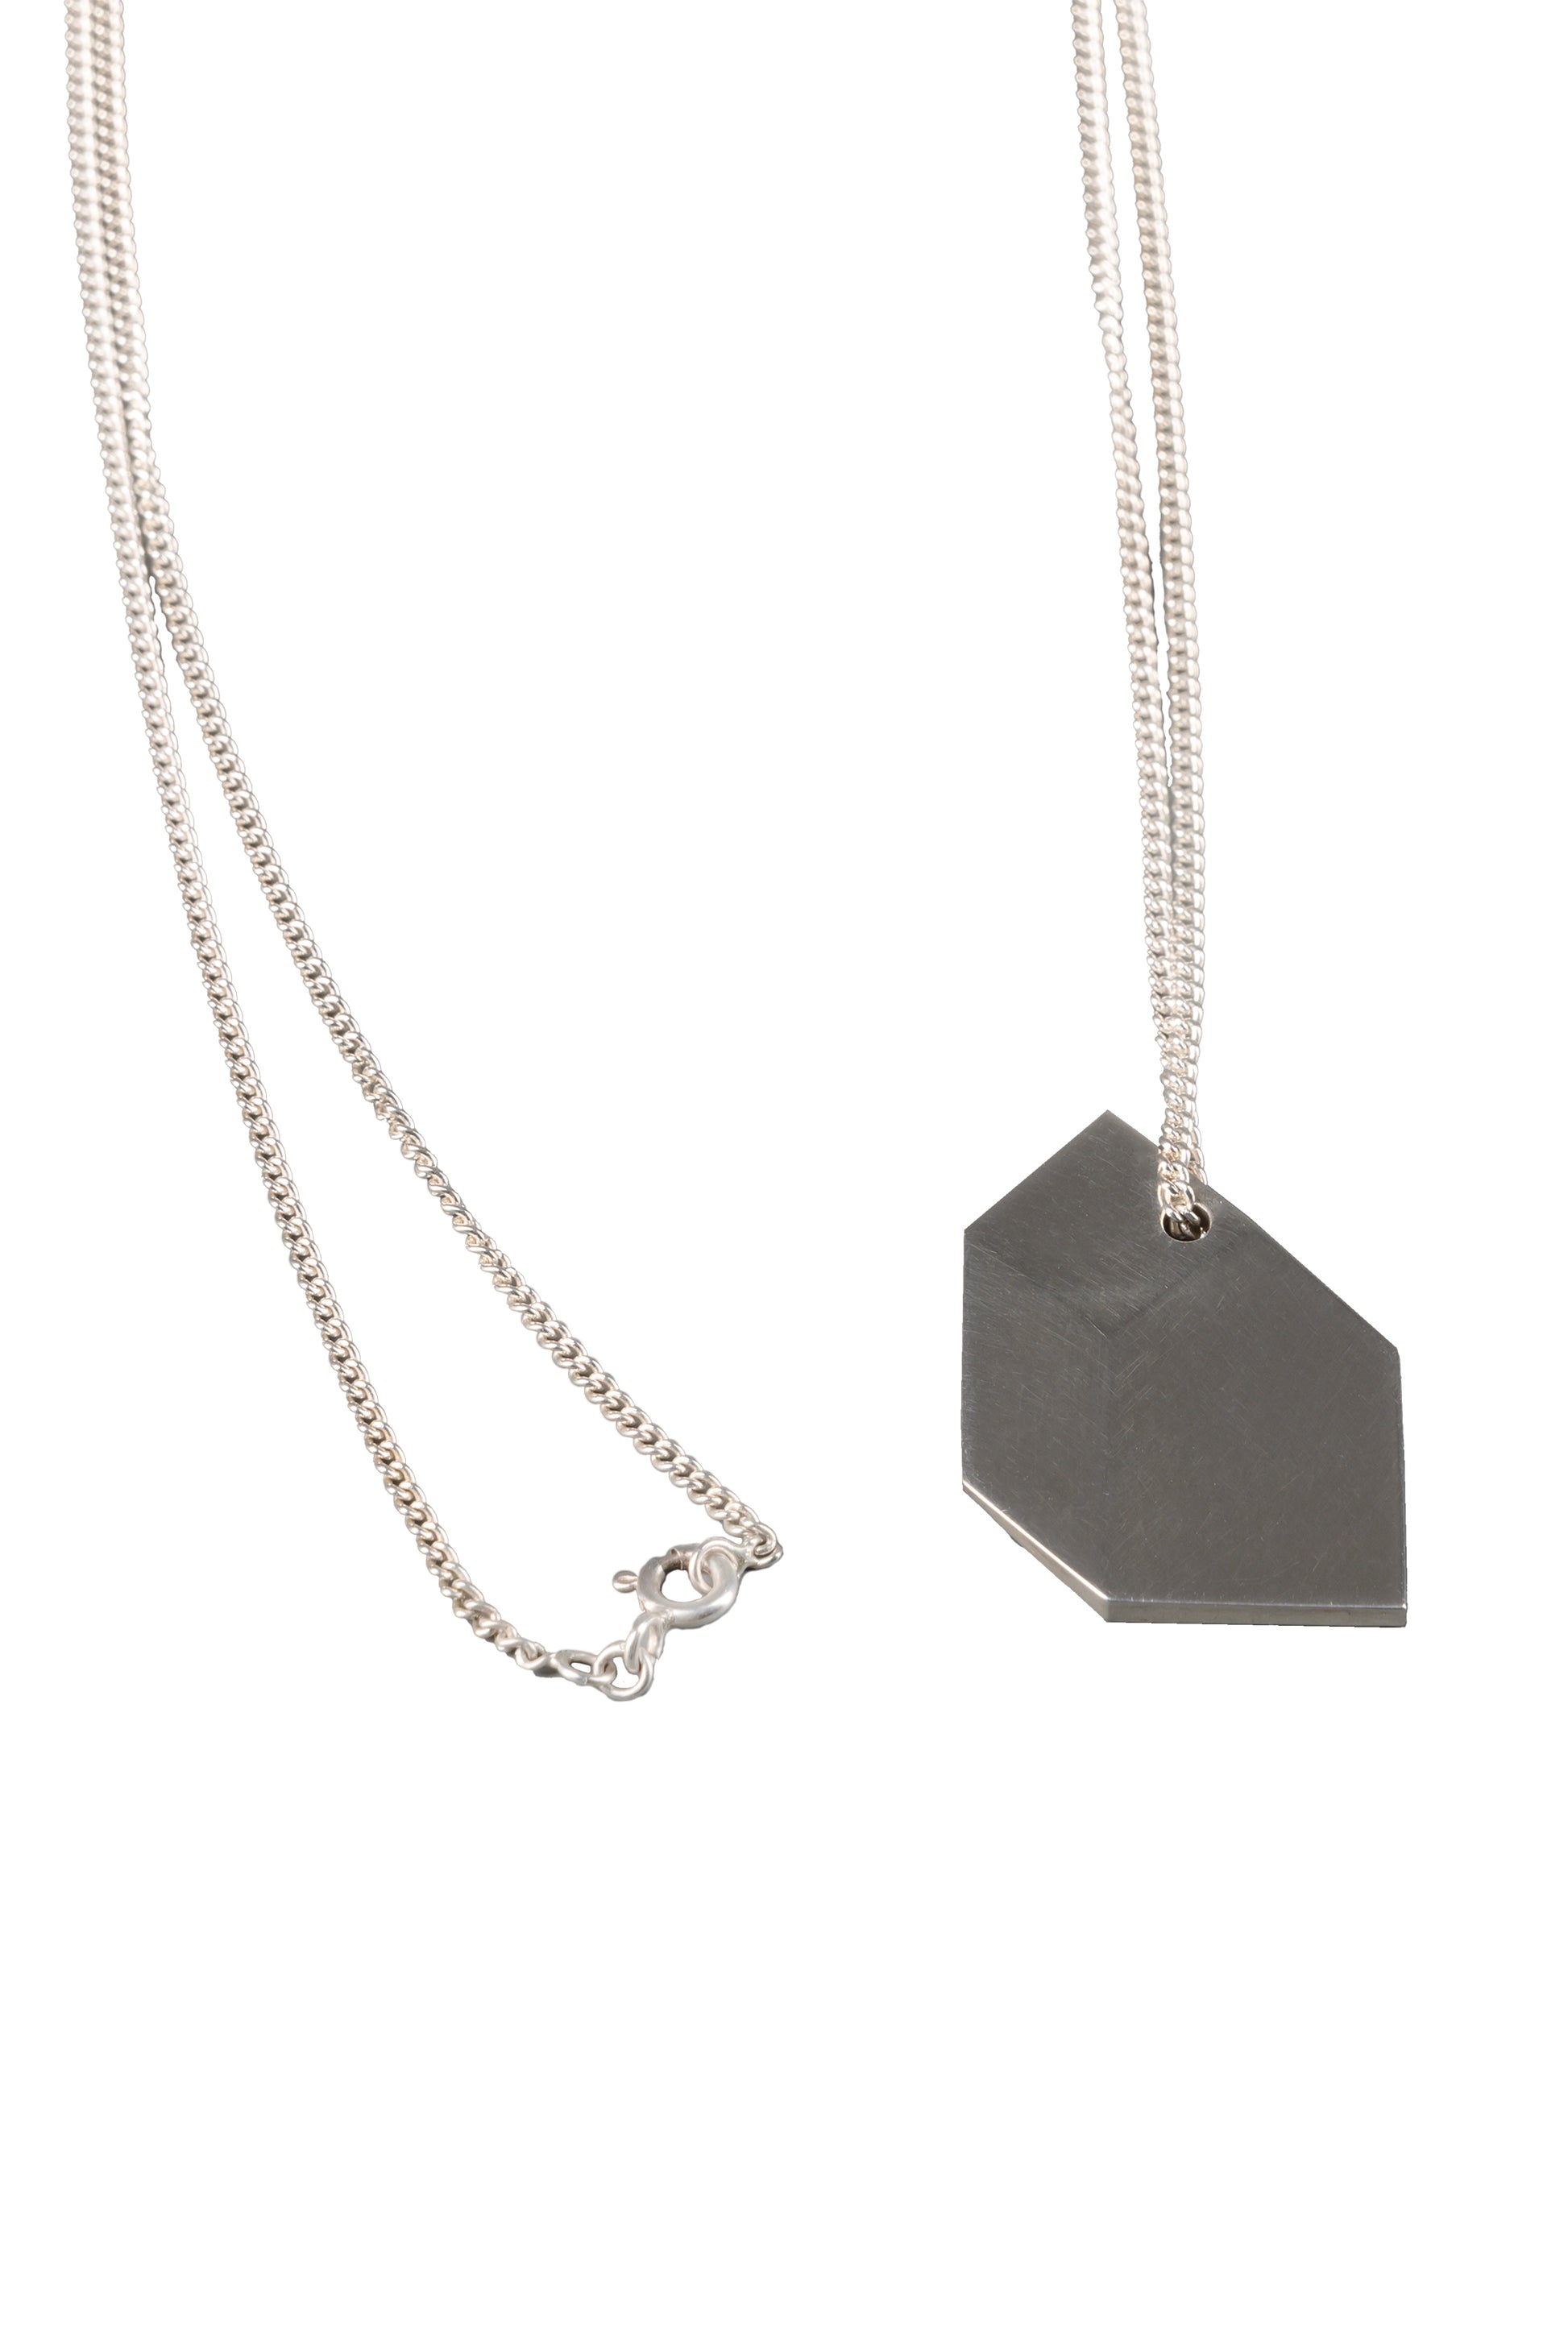 minimalist silver pendant necklace with a geometric design, ideal for adding a subtle, sophisticated sparkle to any look